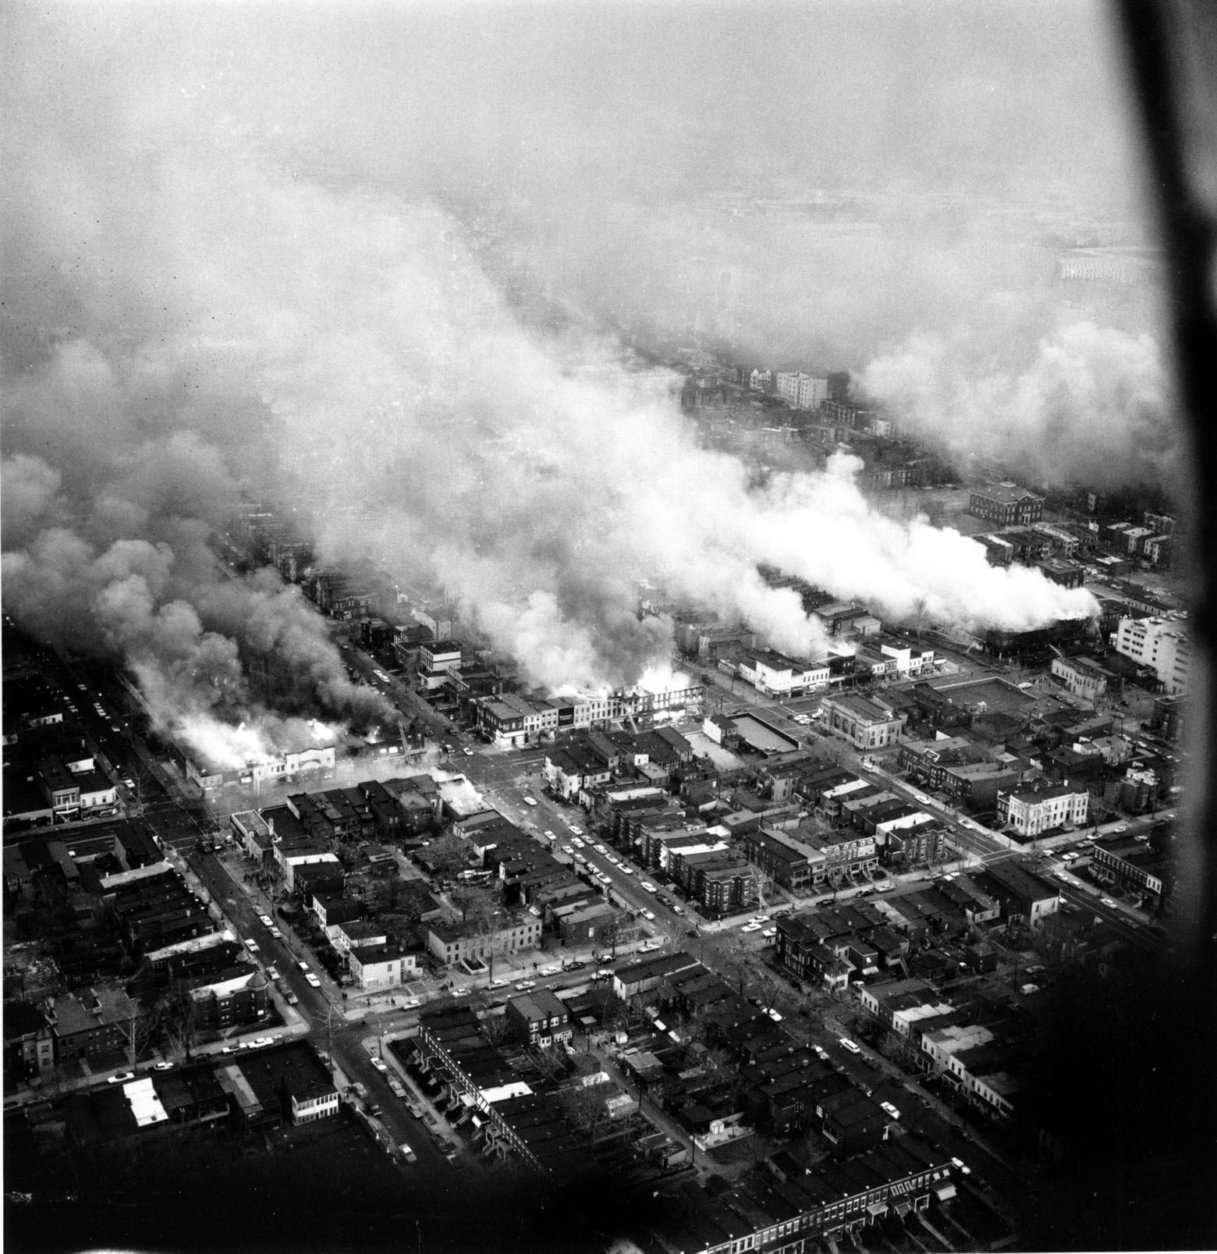 This aerial view shows clouds of smoke rising from burning buildings in northeast Washington, D.C. on April 5, 1968. The fires resulted from rioting and demonstrations after the assassination of Dr. Martin Luther King, Jr. in Memphis, Tenn. on April 4. (AP Photo)